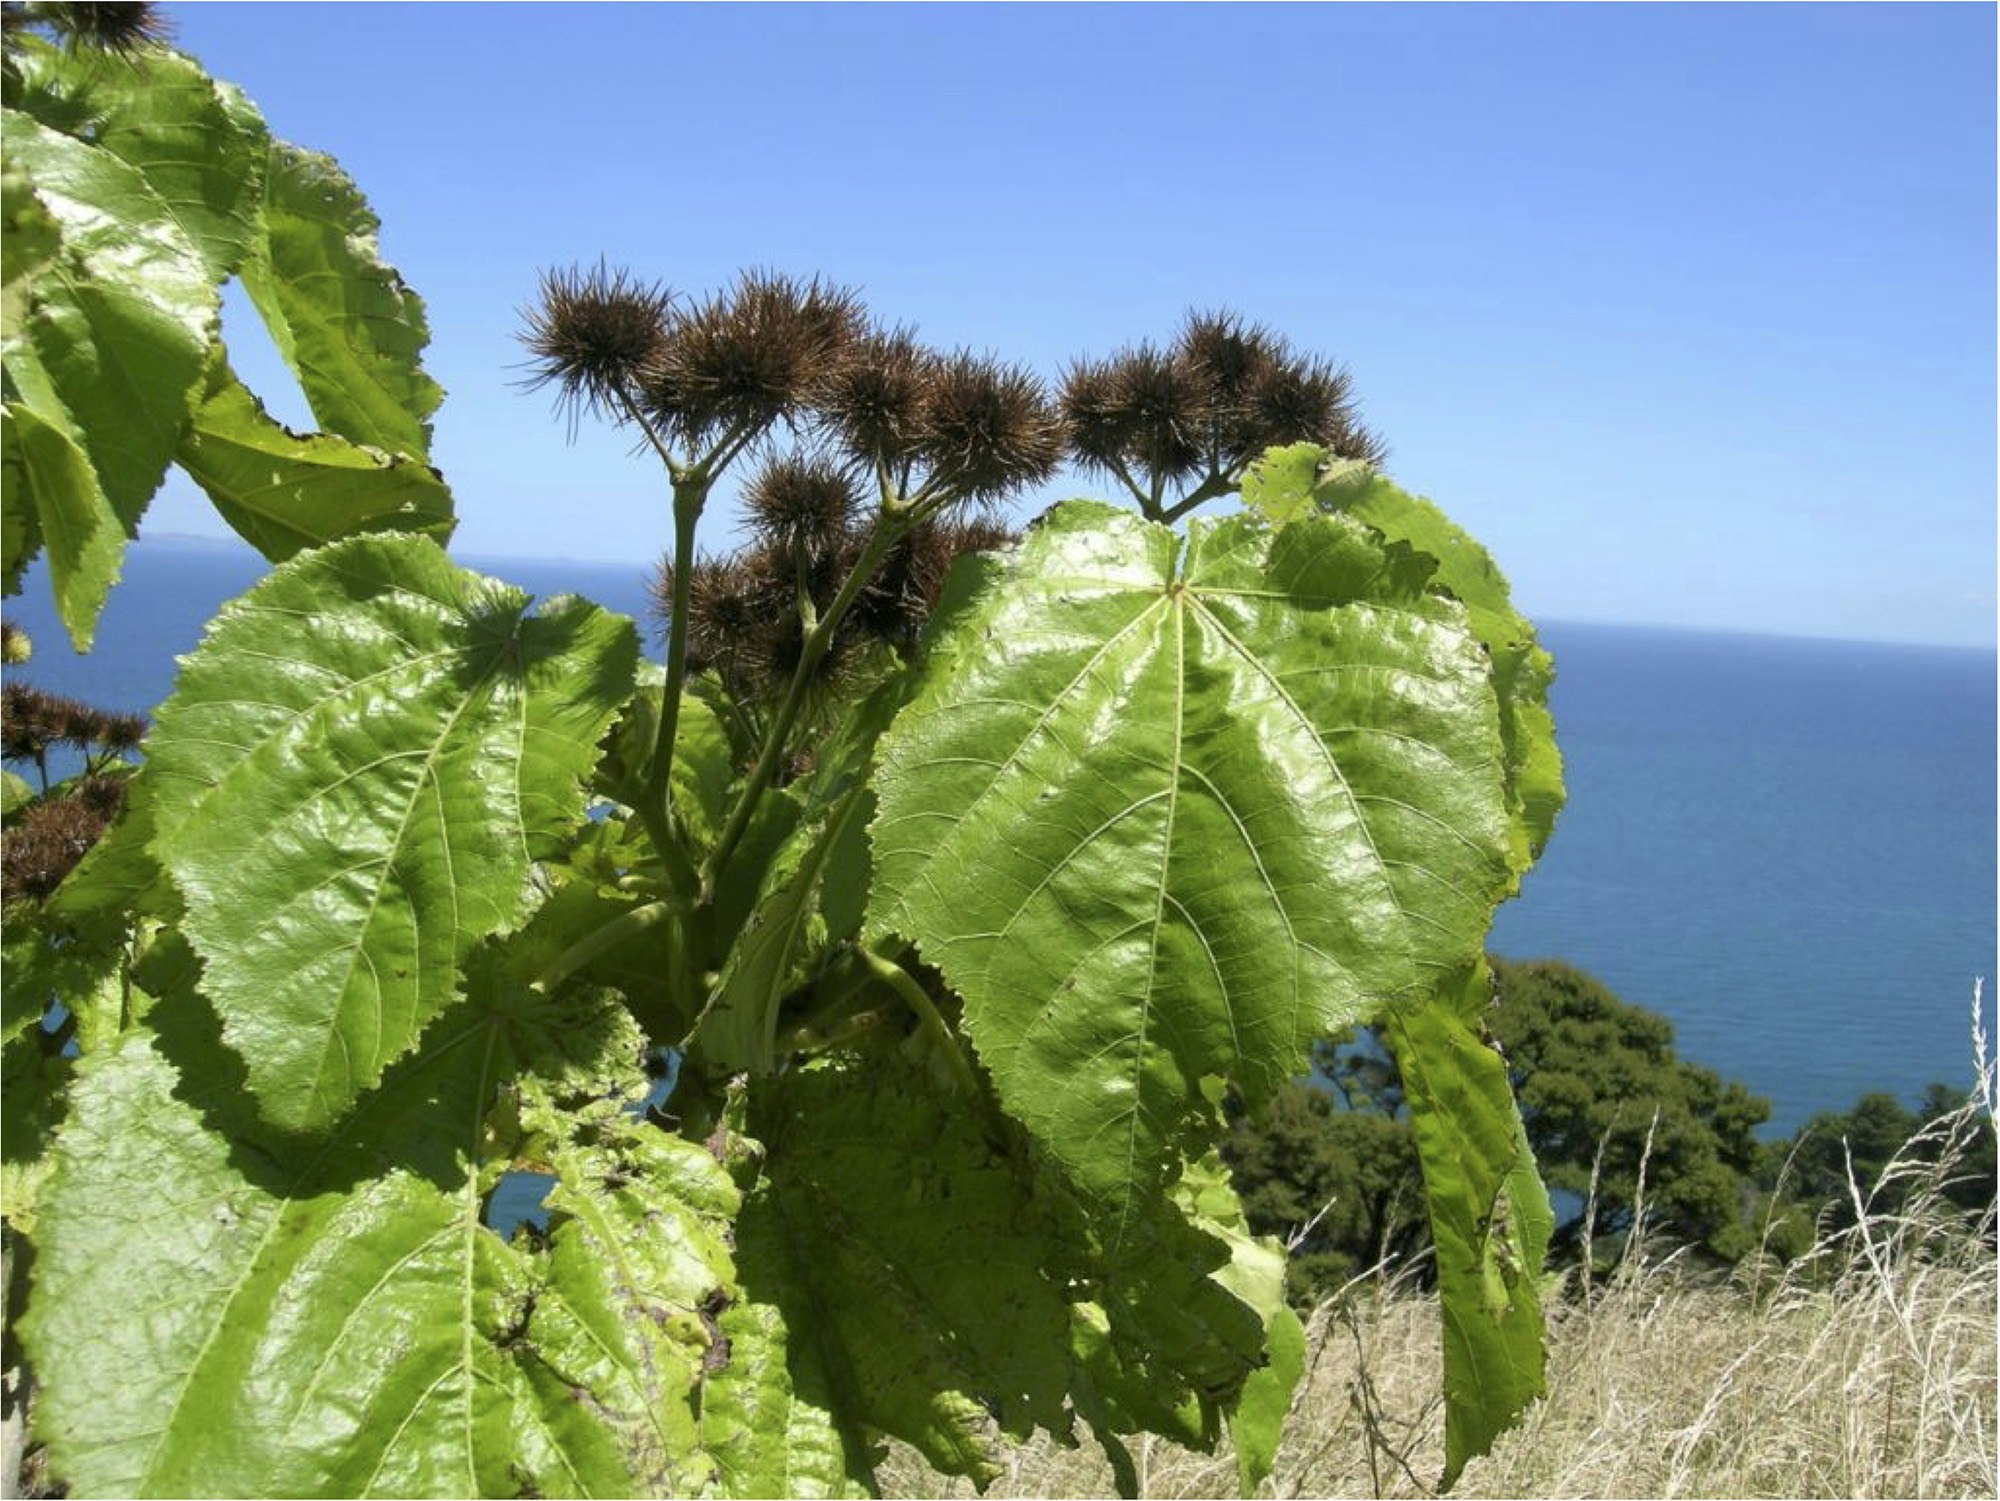 A photo of a plant with large green leaves and spiky fronds with the sea and sky in the background